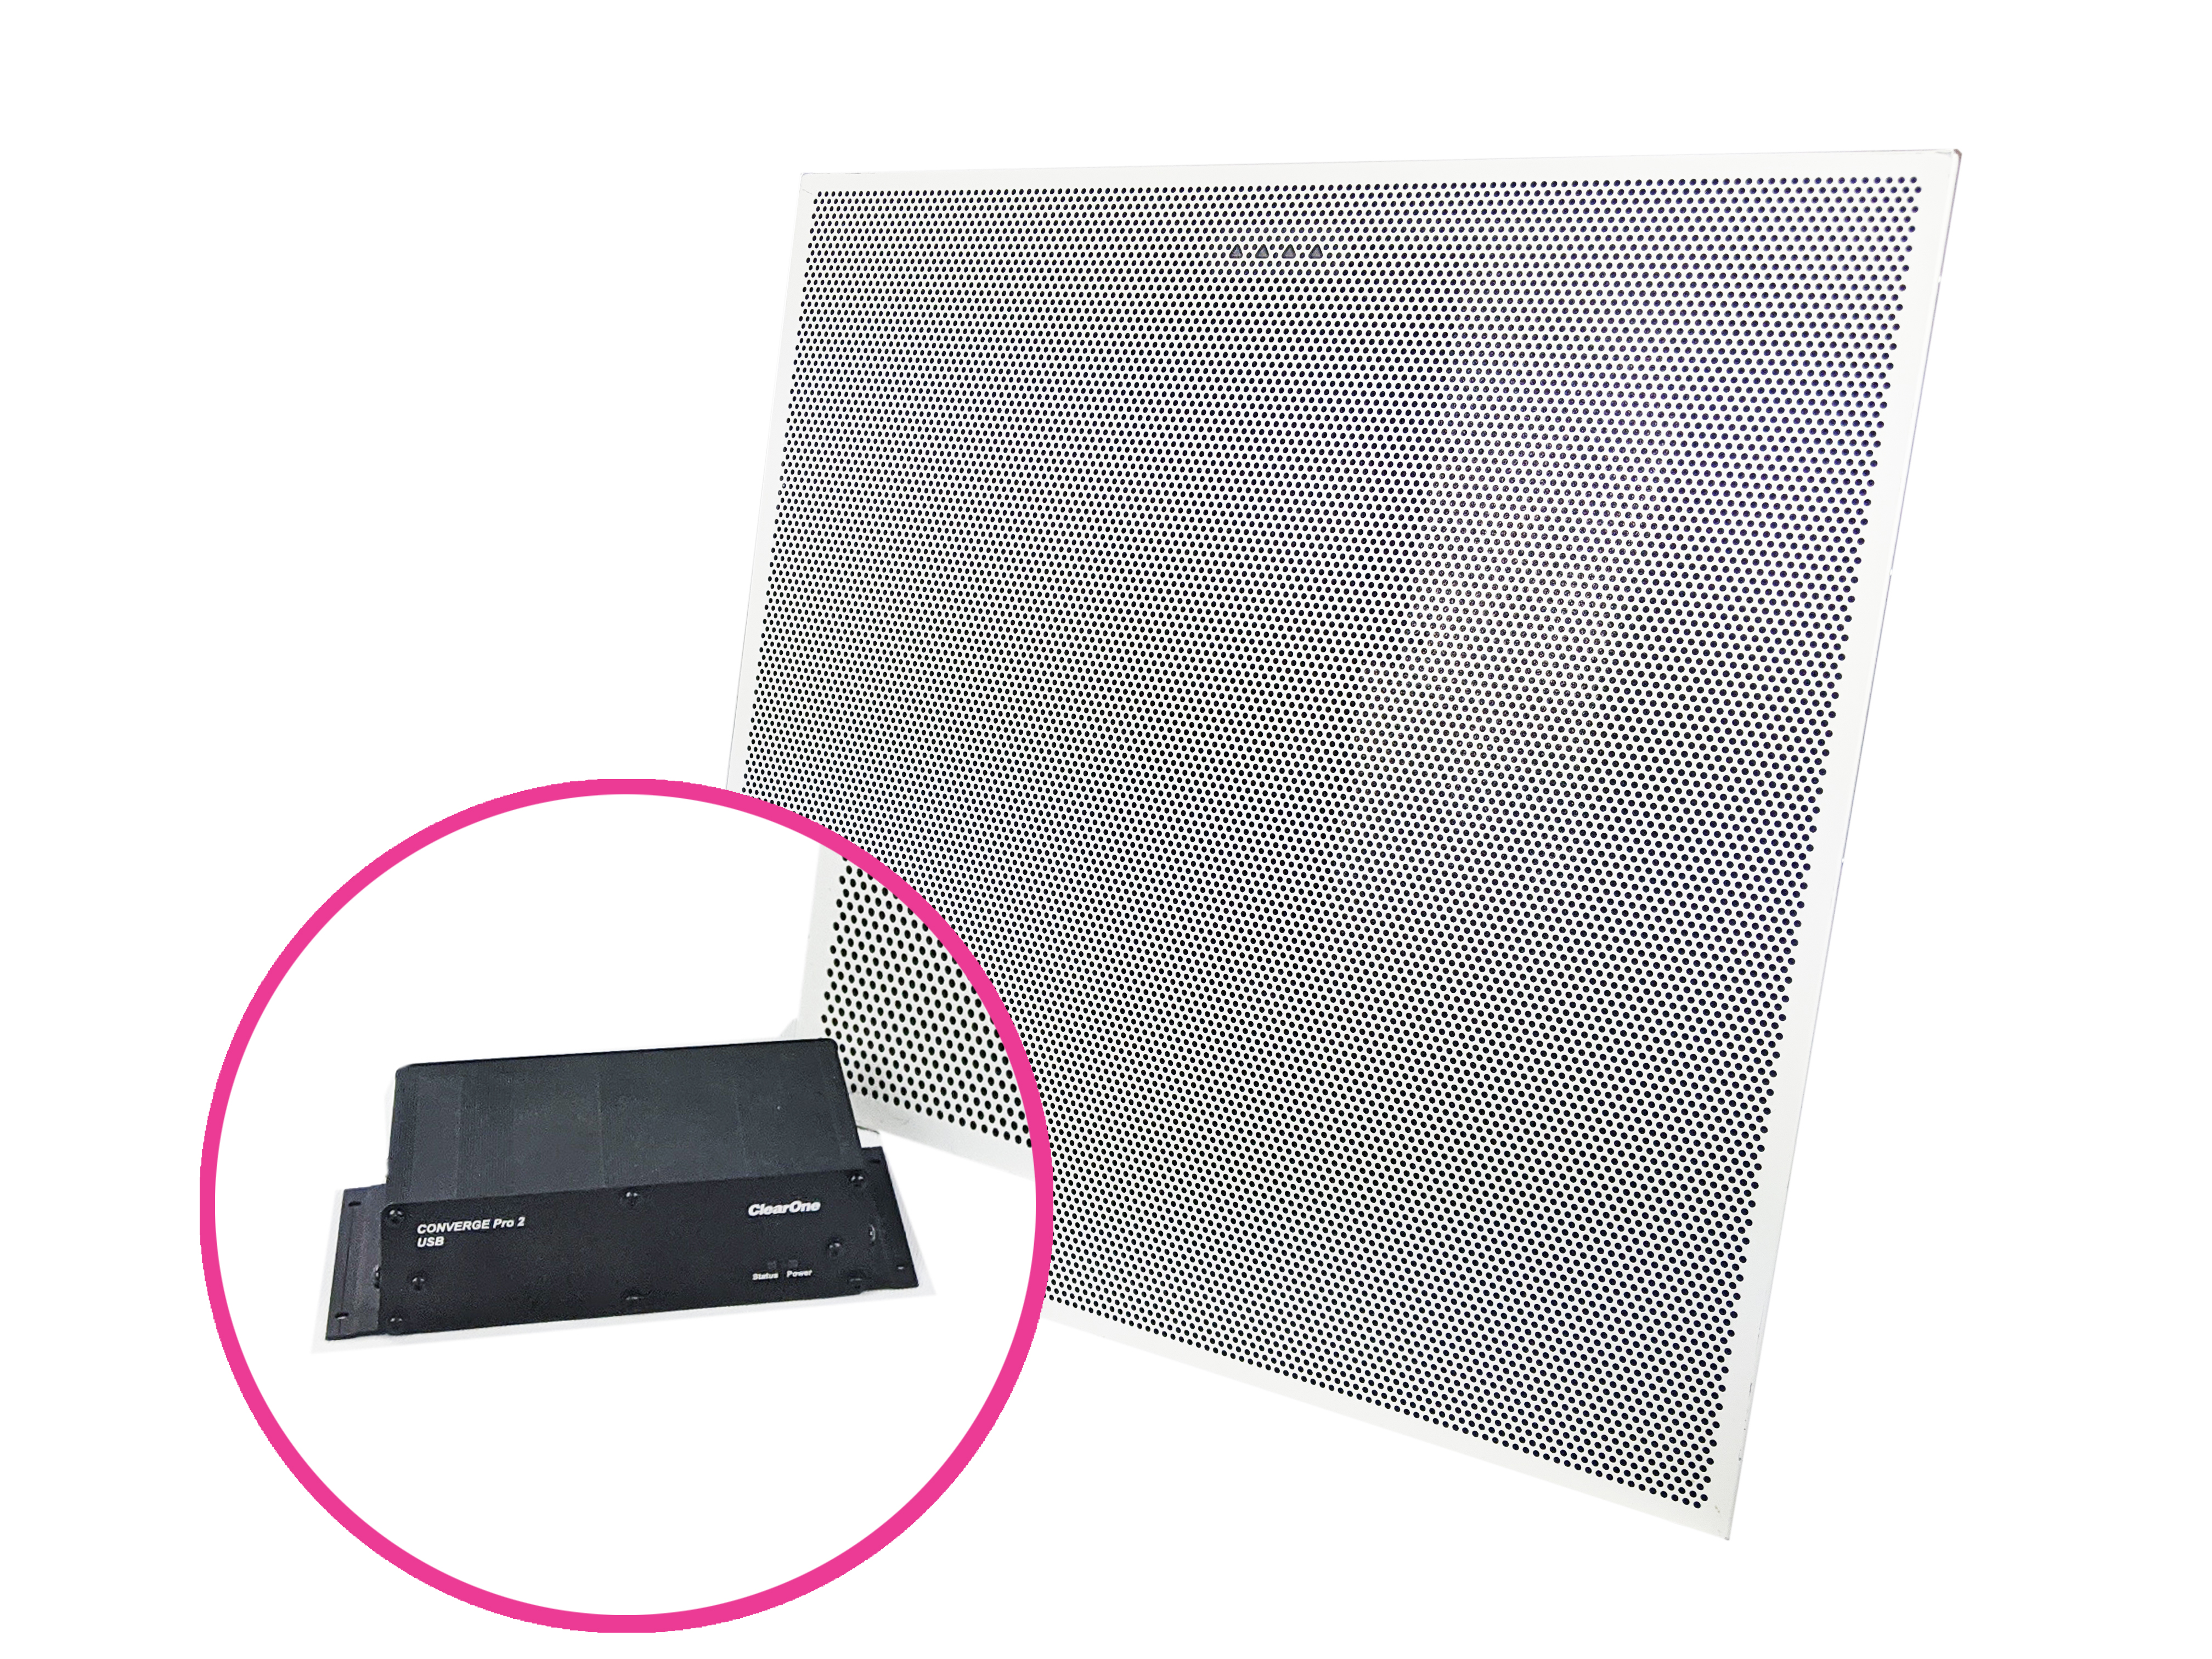 ClearOne Versa Lite CT - Beamforming Mic Array CTH and ClearOne USB Expander